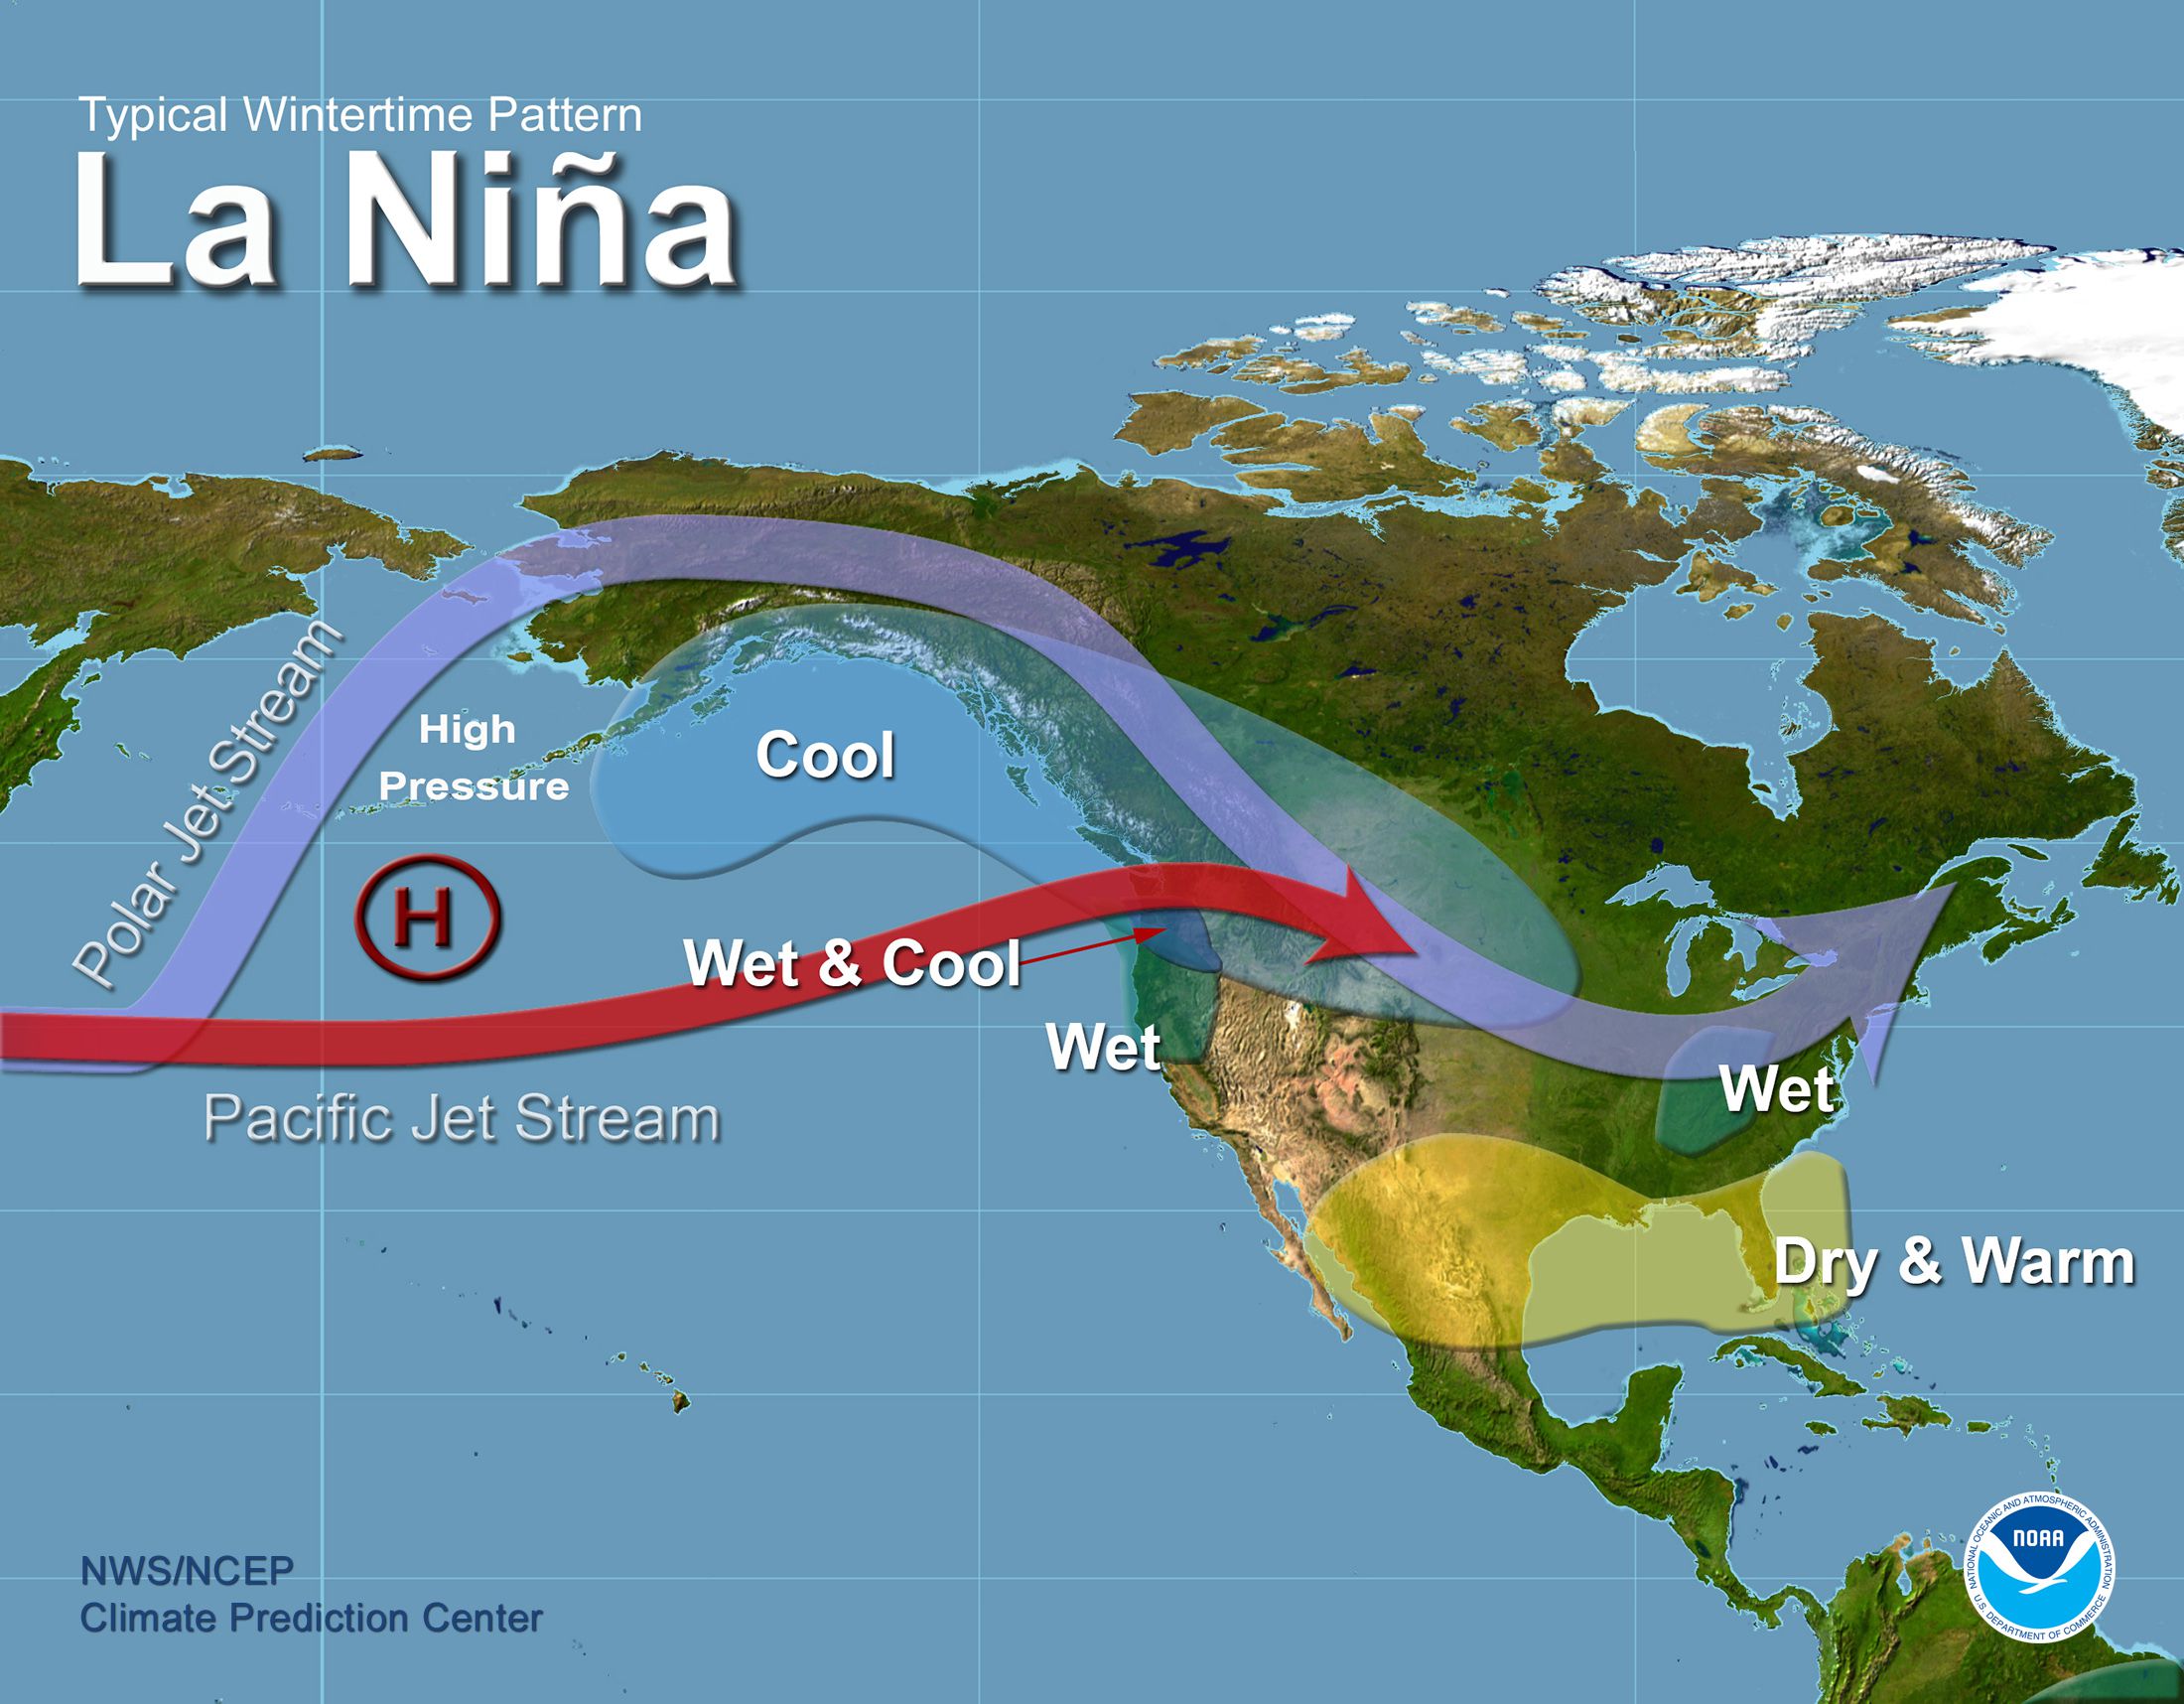 What are El Niño and La Niña, and how do they change the weather?